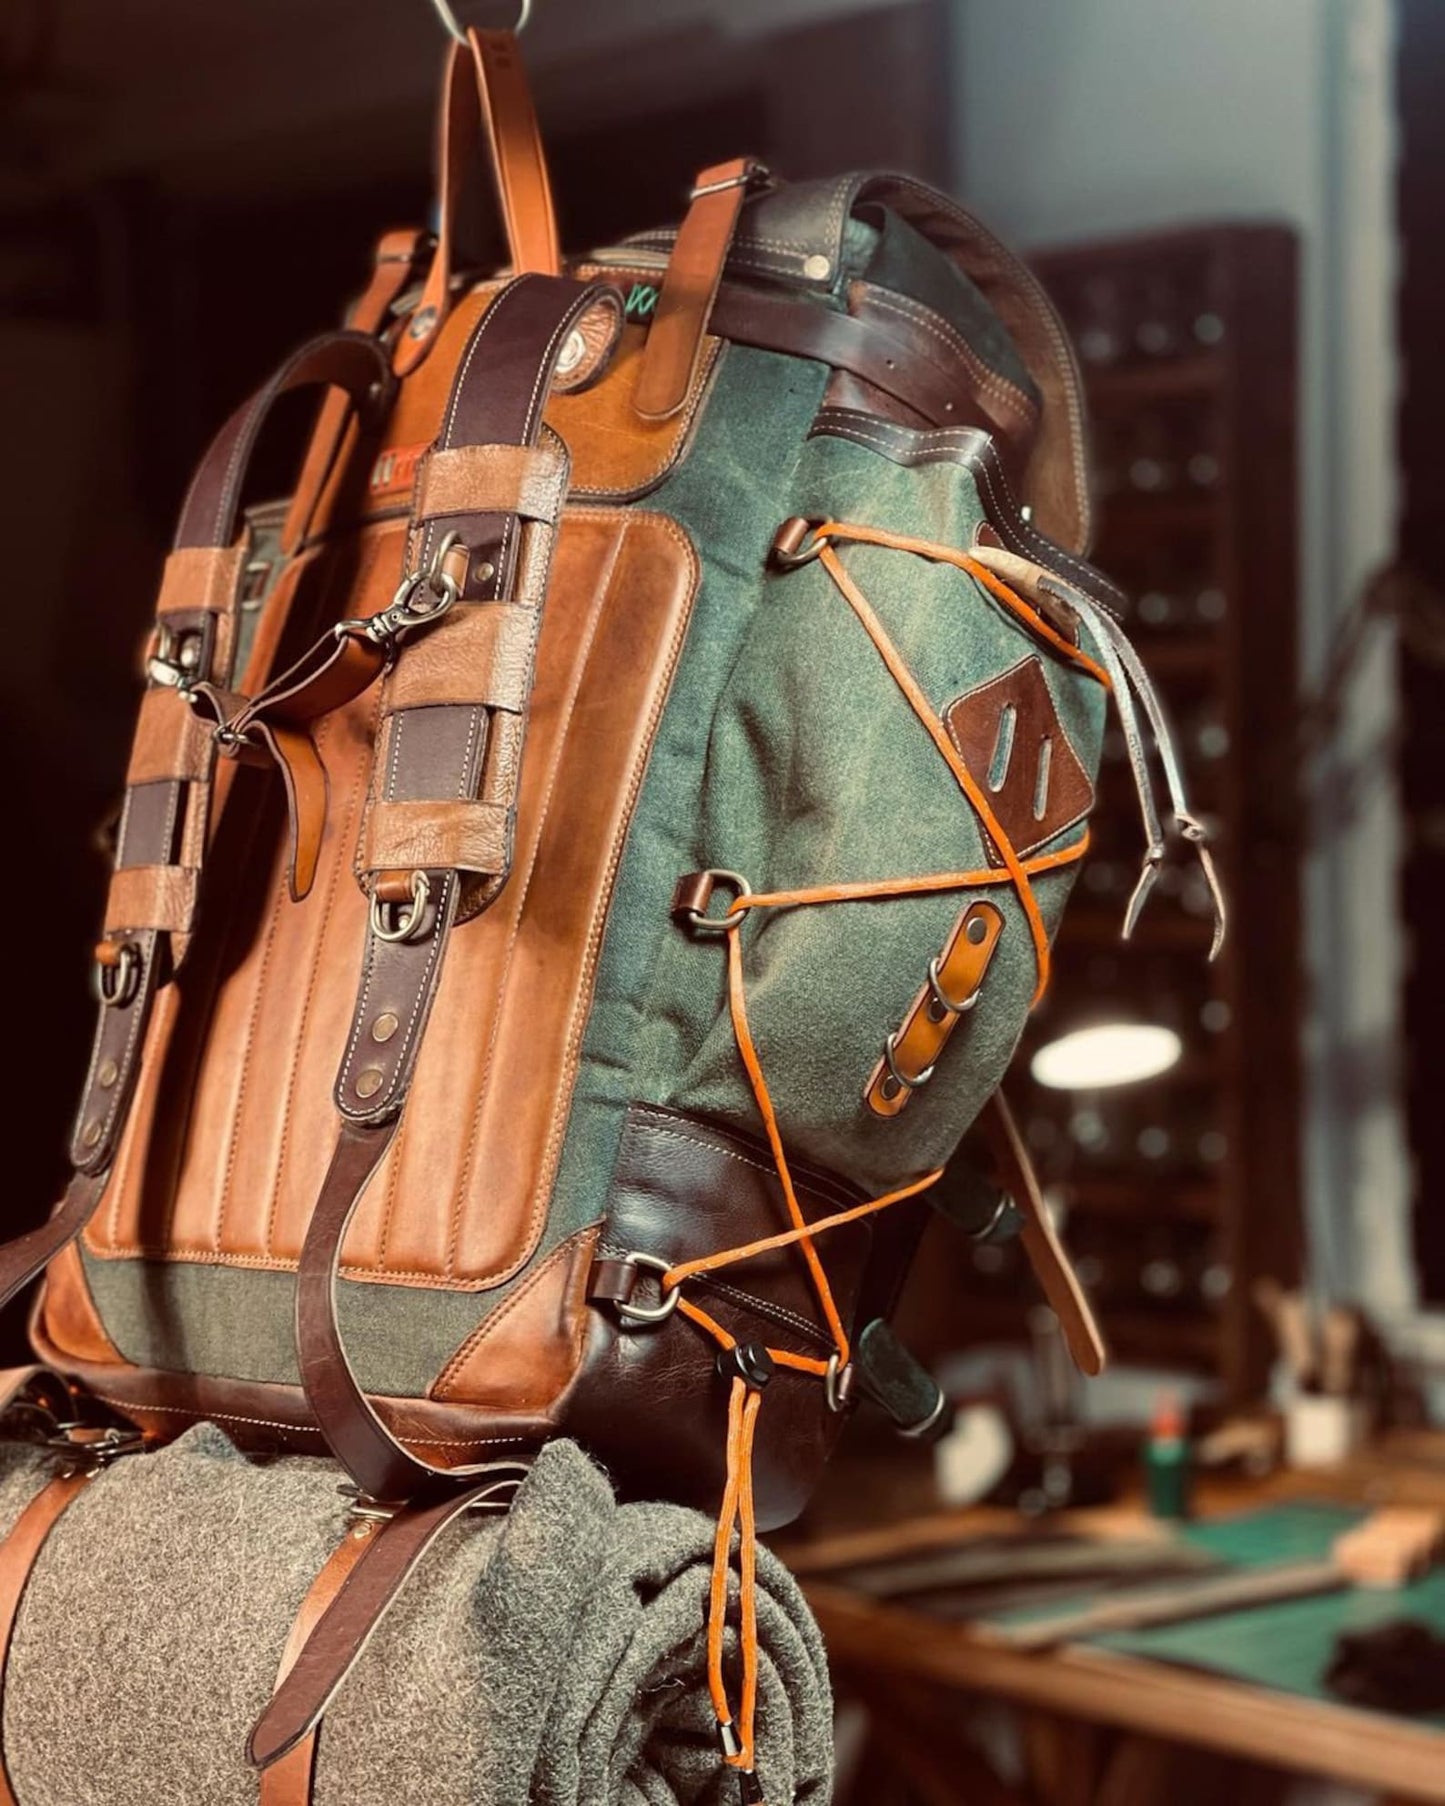 Bestseller | Limited discount | 45L | Handmade Leather backpack | Waxed Canvas Backpack | Travel, Camping, Bushcraft | Personalization bushcraft - camping - hiking backpack 99percenthandmade   